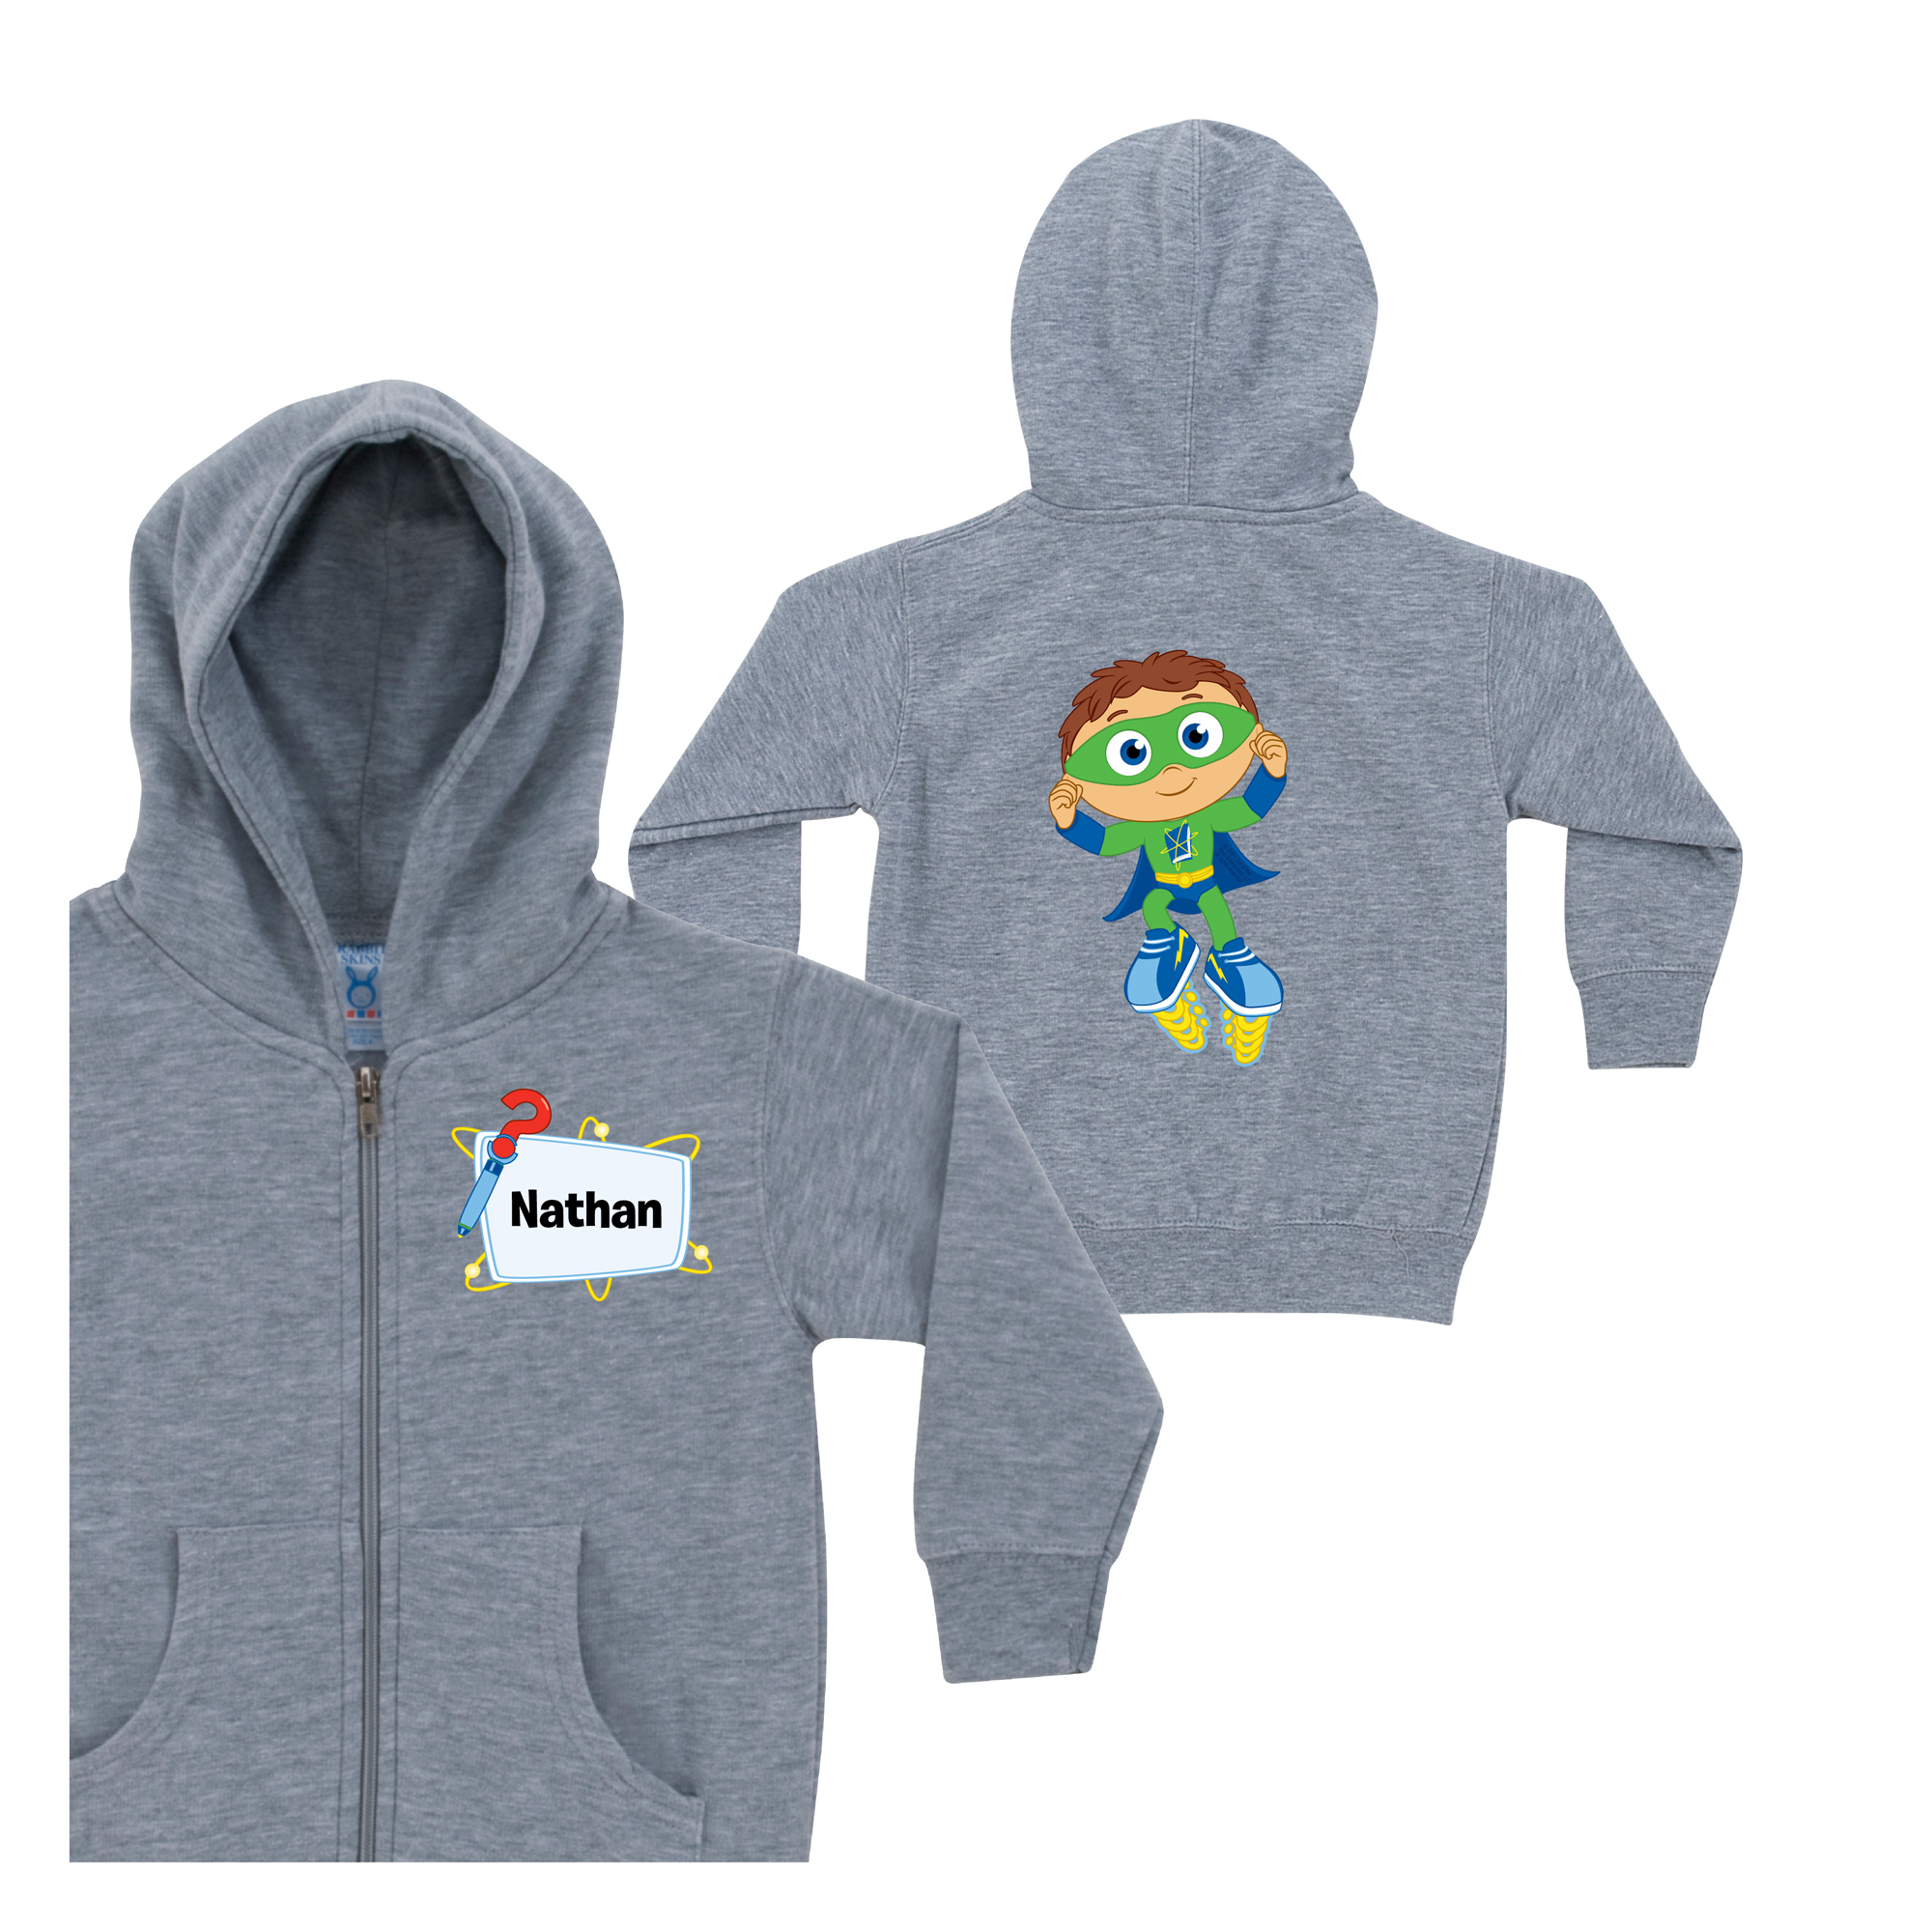 Super Why Ready, Set, Zap! Gray Zip-Up Hoodie